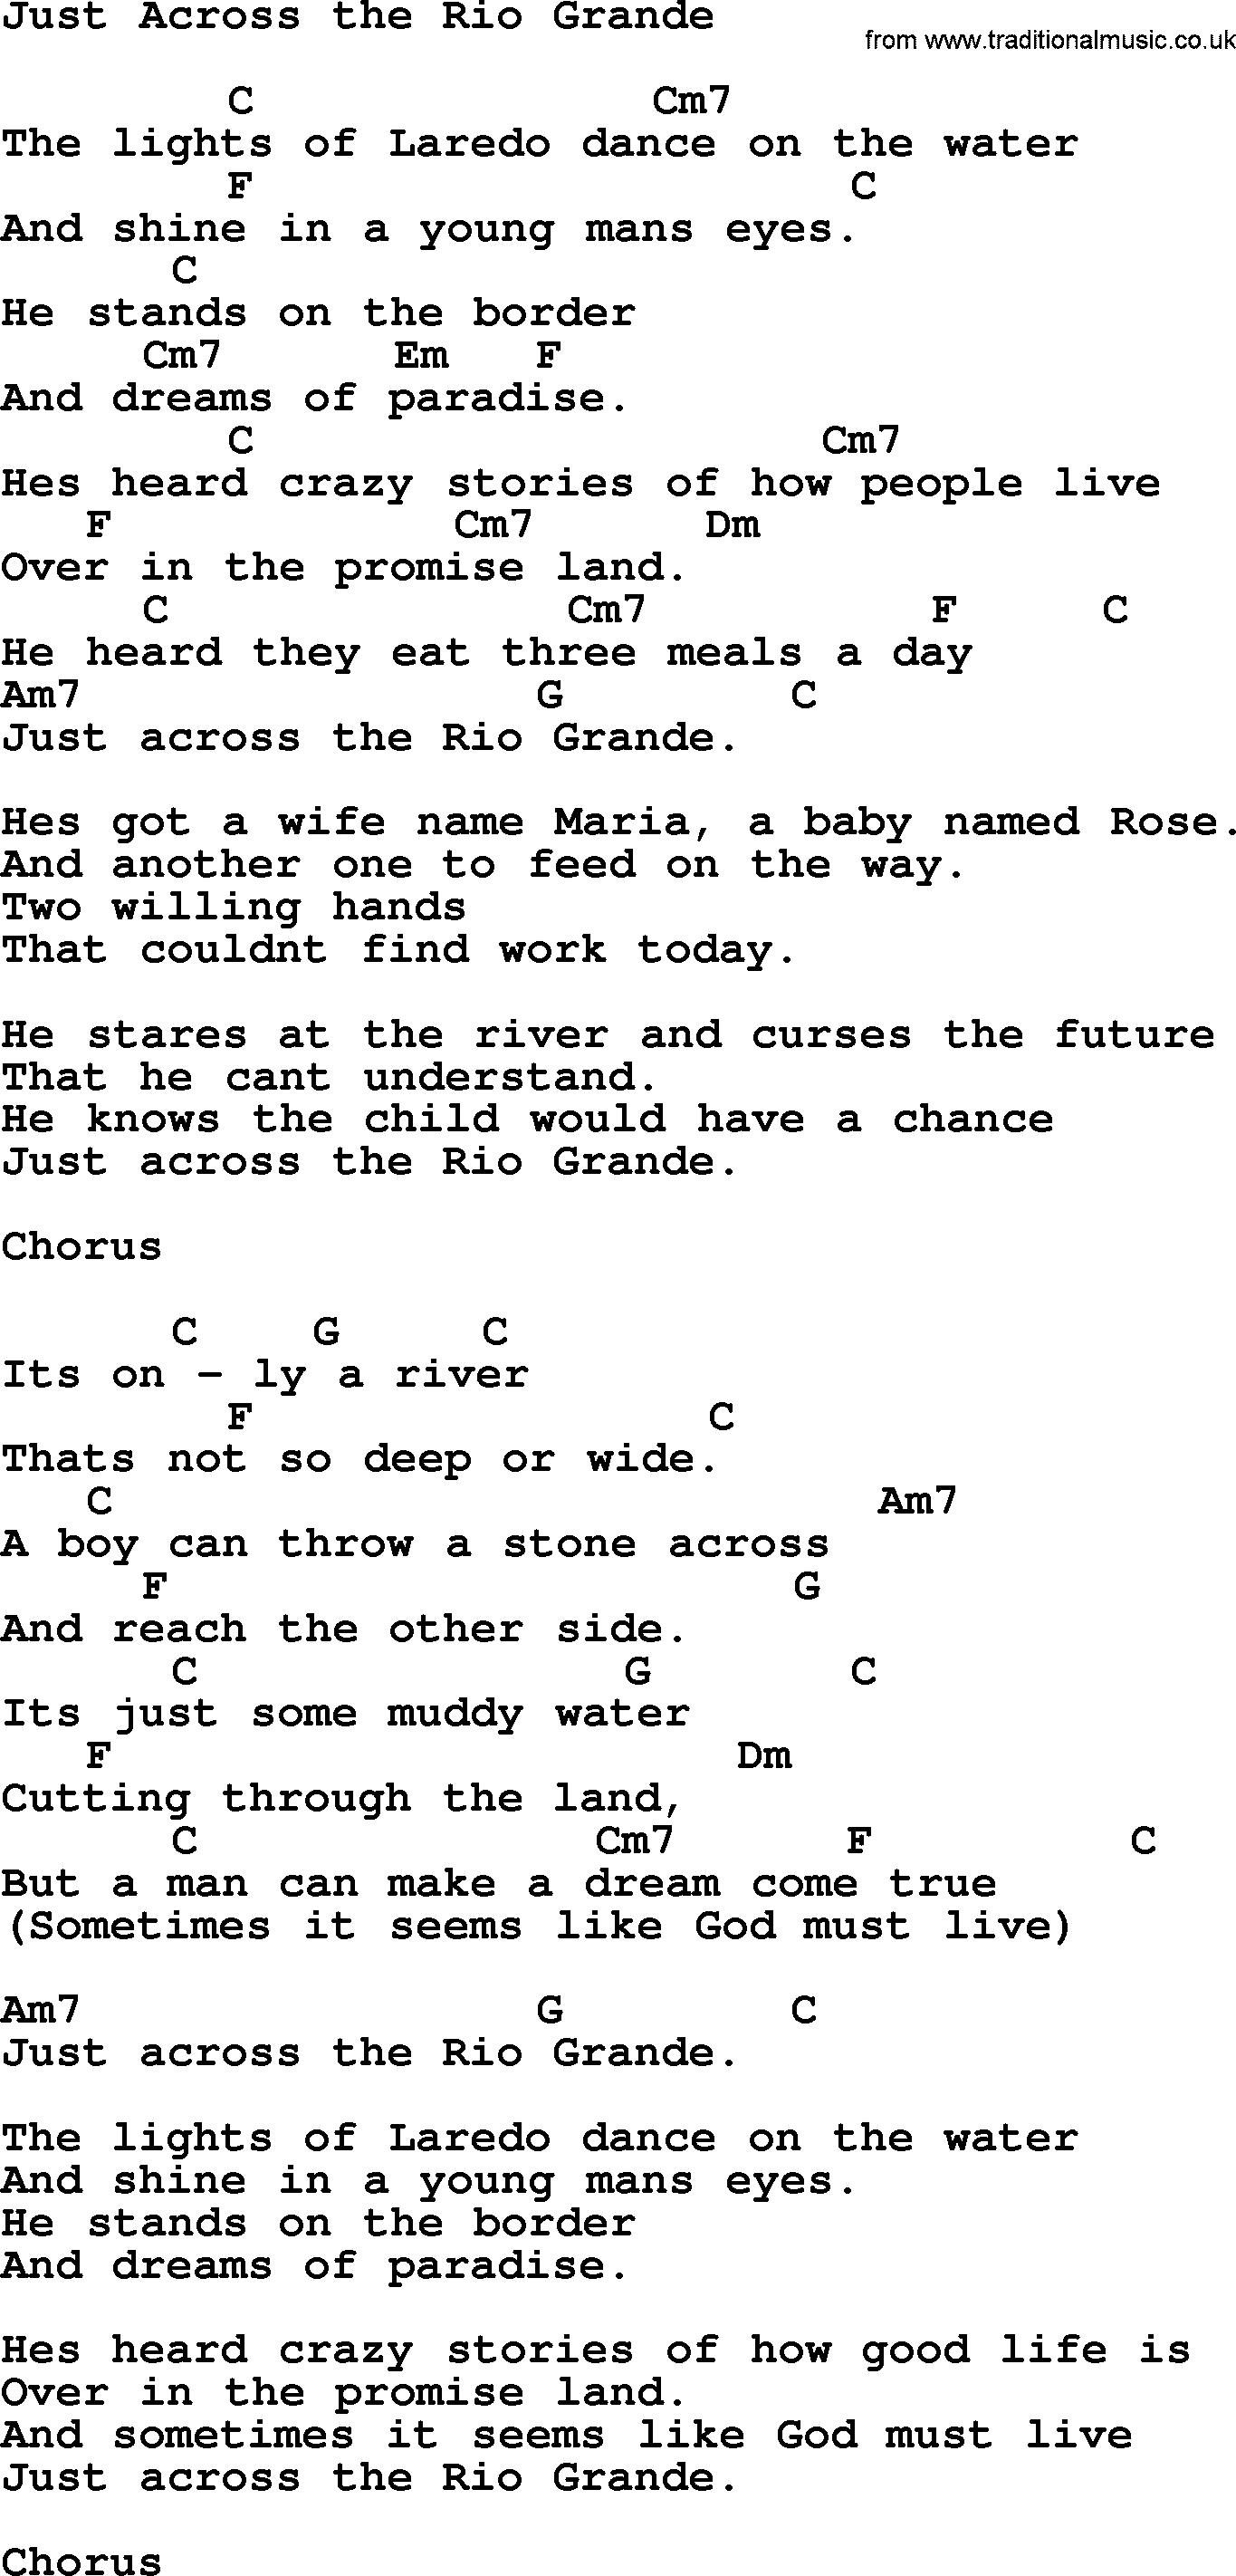 Reba McEntire song: Just Across the Rio Grande, lyrics and chords